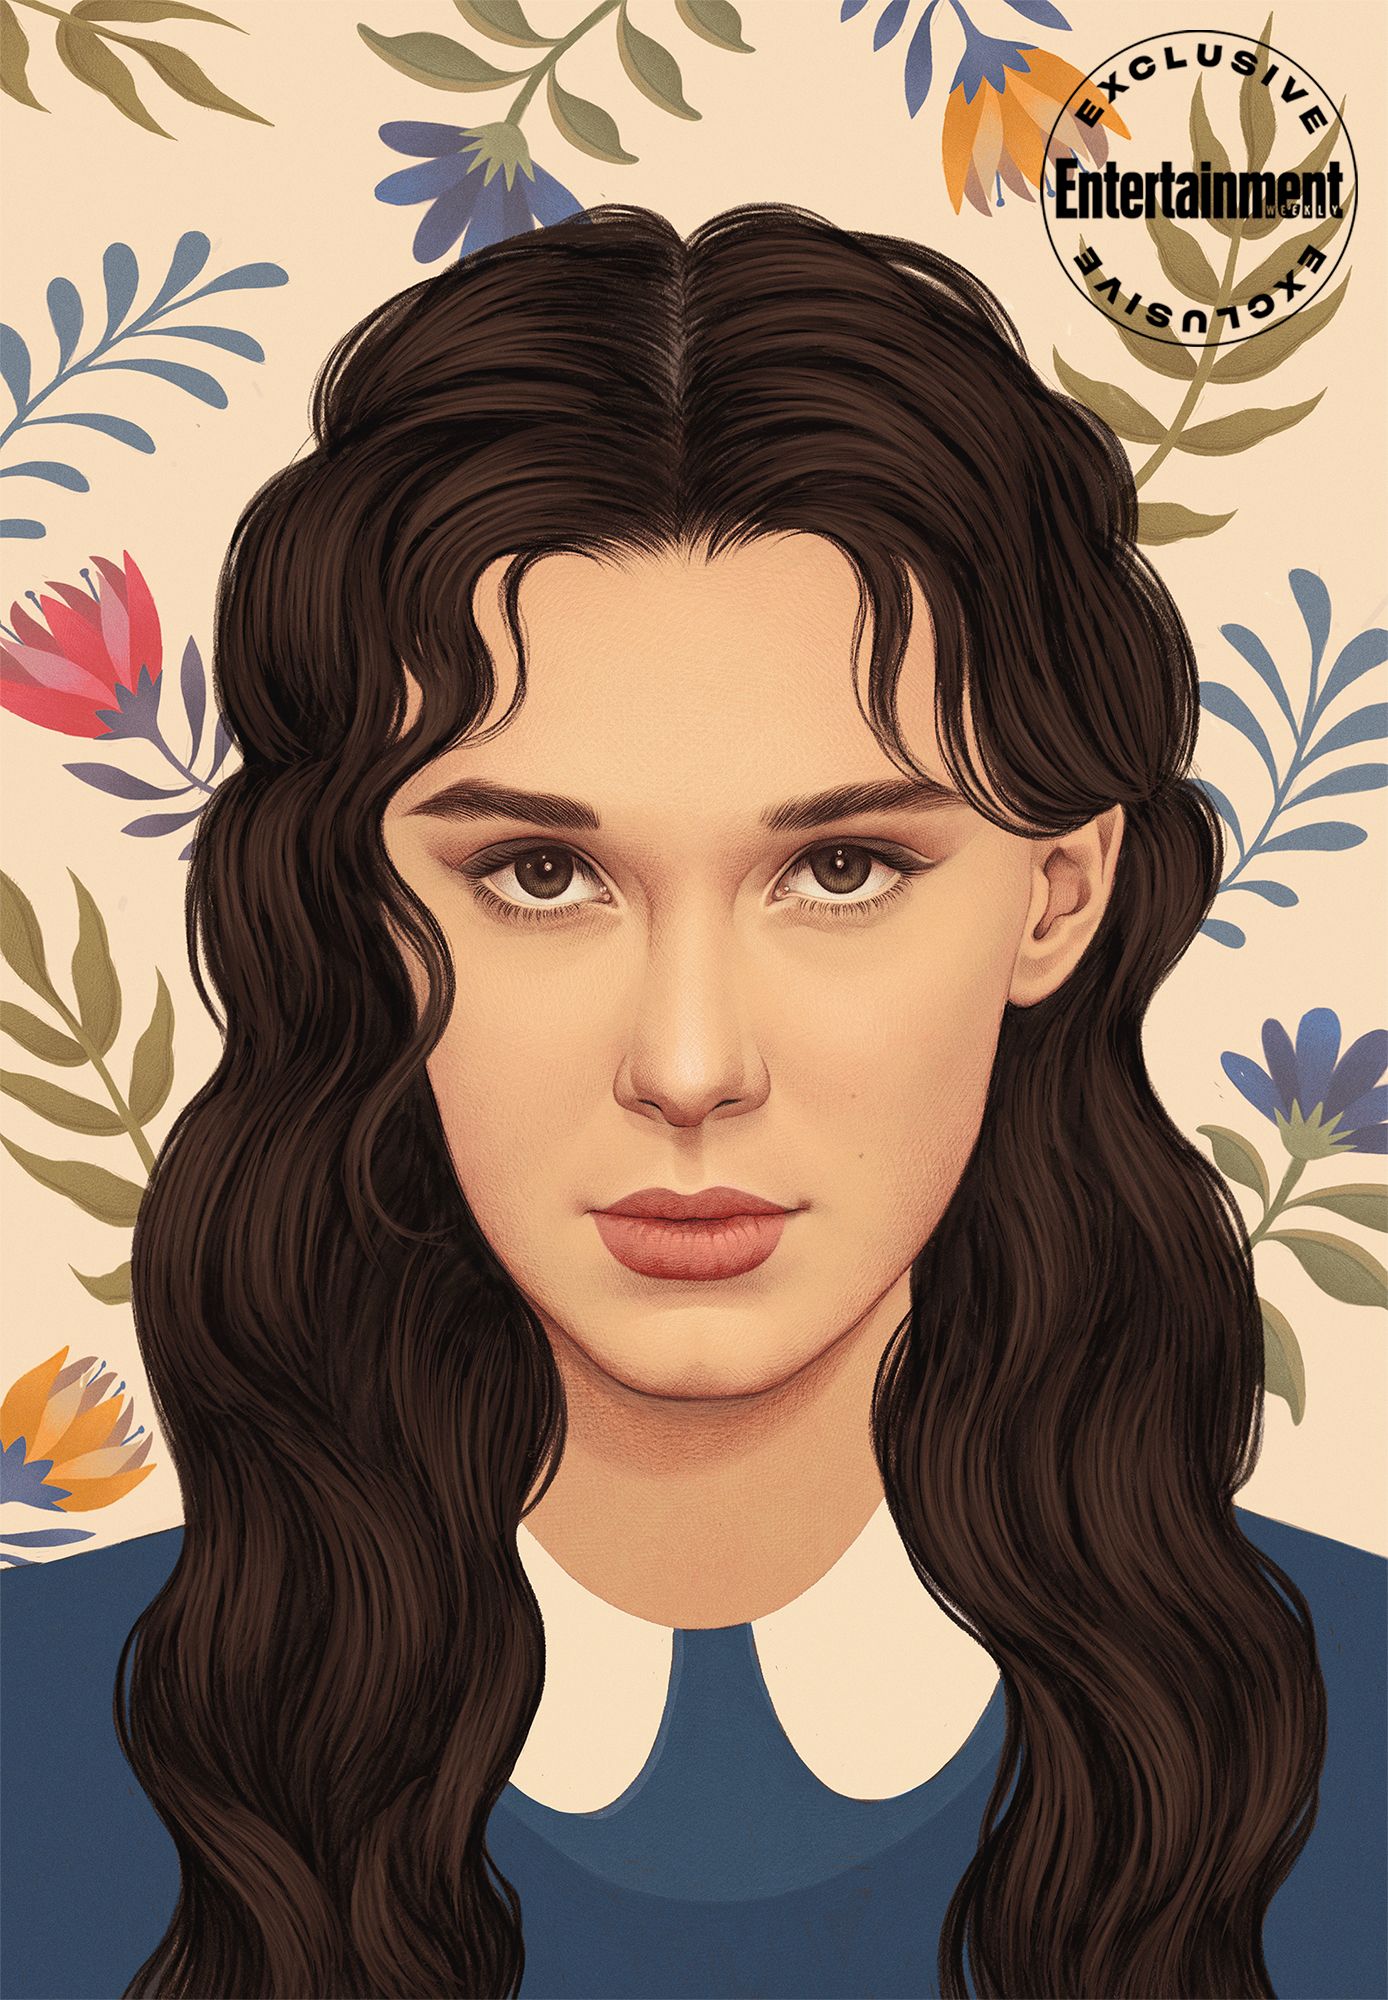 1125x2436 Resolution Millie Bobby Brown and Helena Bonham Carter Enola  Holmes 2 Iphone XSIphone 10Iphone X Wallpaper  Wallpapers Den